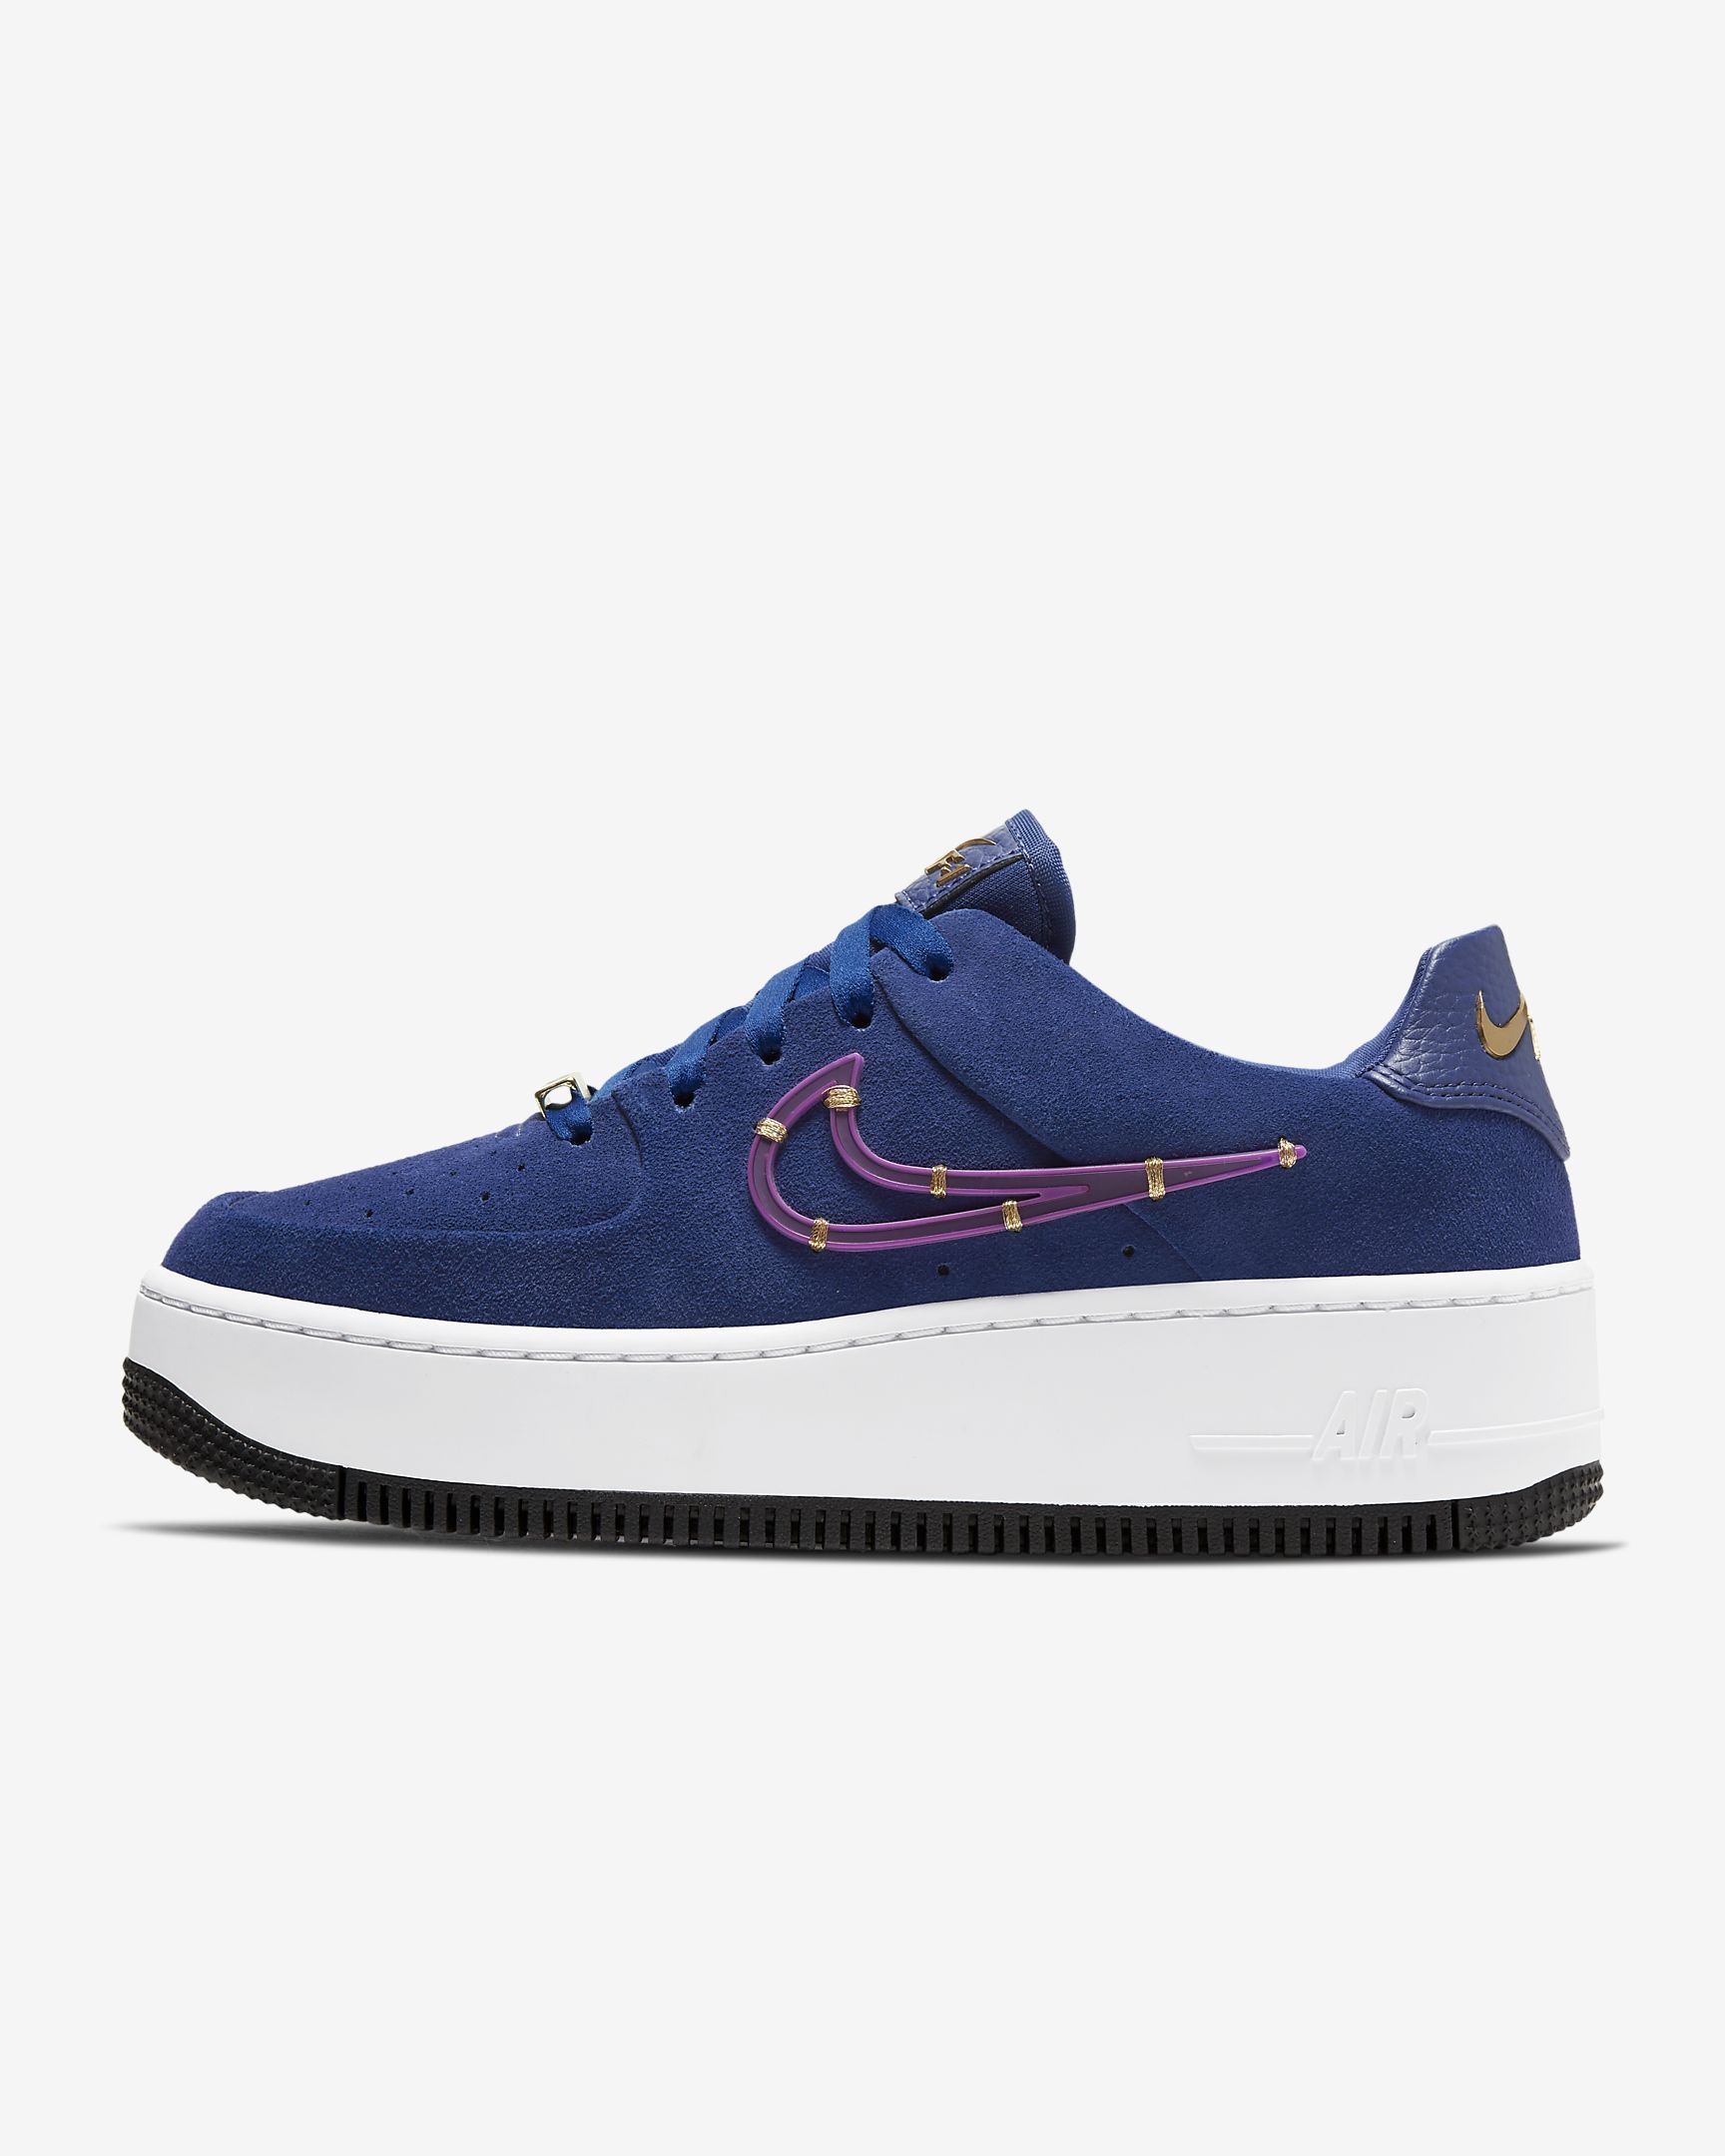 Best Nike Air Force 1 Sneakers to Shop 